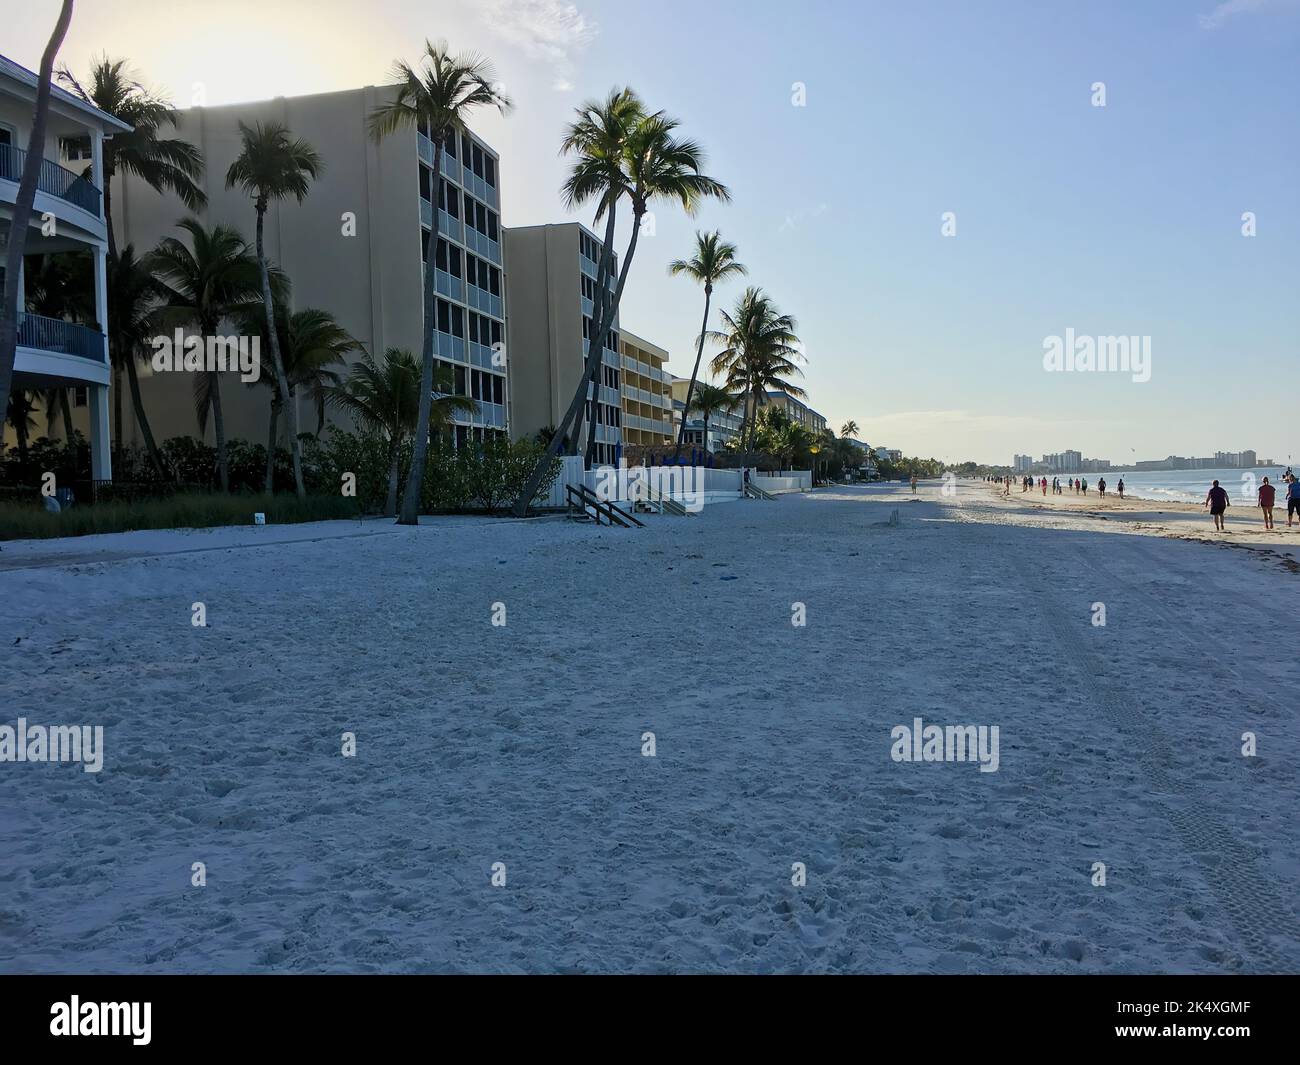 Fort Myers Beach, FL, USA - Oct 4, 2022: A photo from 2017 showing the view along Ft Myers Beach looking south with condominiums as everything appeare Stock Photo